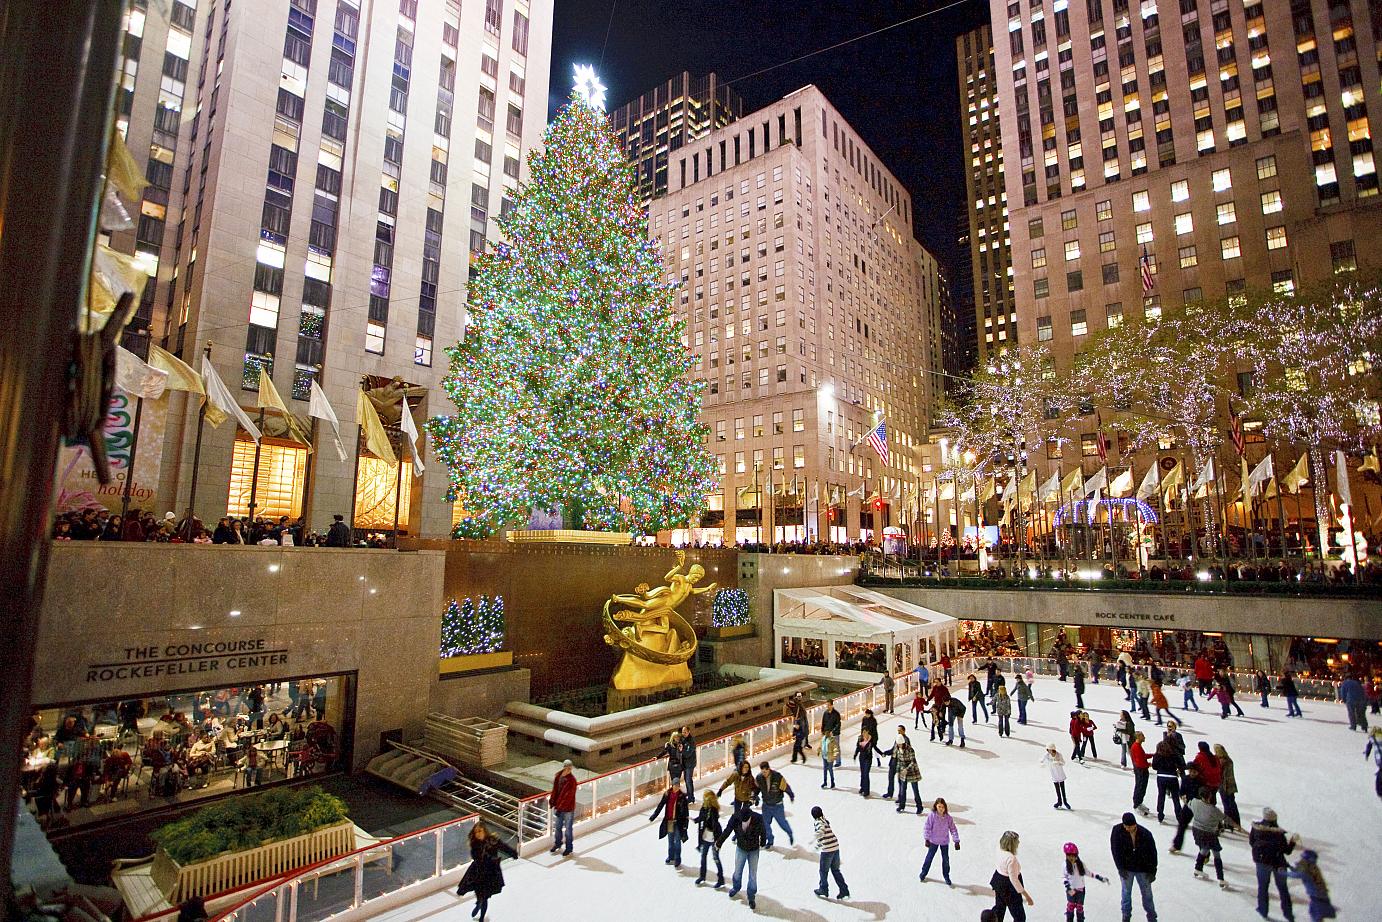 When the enormous Christmas tree is put up at the Rockefeller Center, tens of thousands will crowd the sidewalks for the event and hundreds of millions will watch it live across the continents. The Ice Rink at its feet could well be the most famous one on the globe. Photo credit: Will Steacy. 